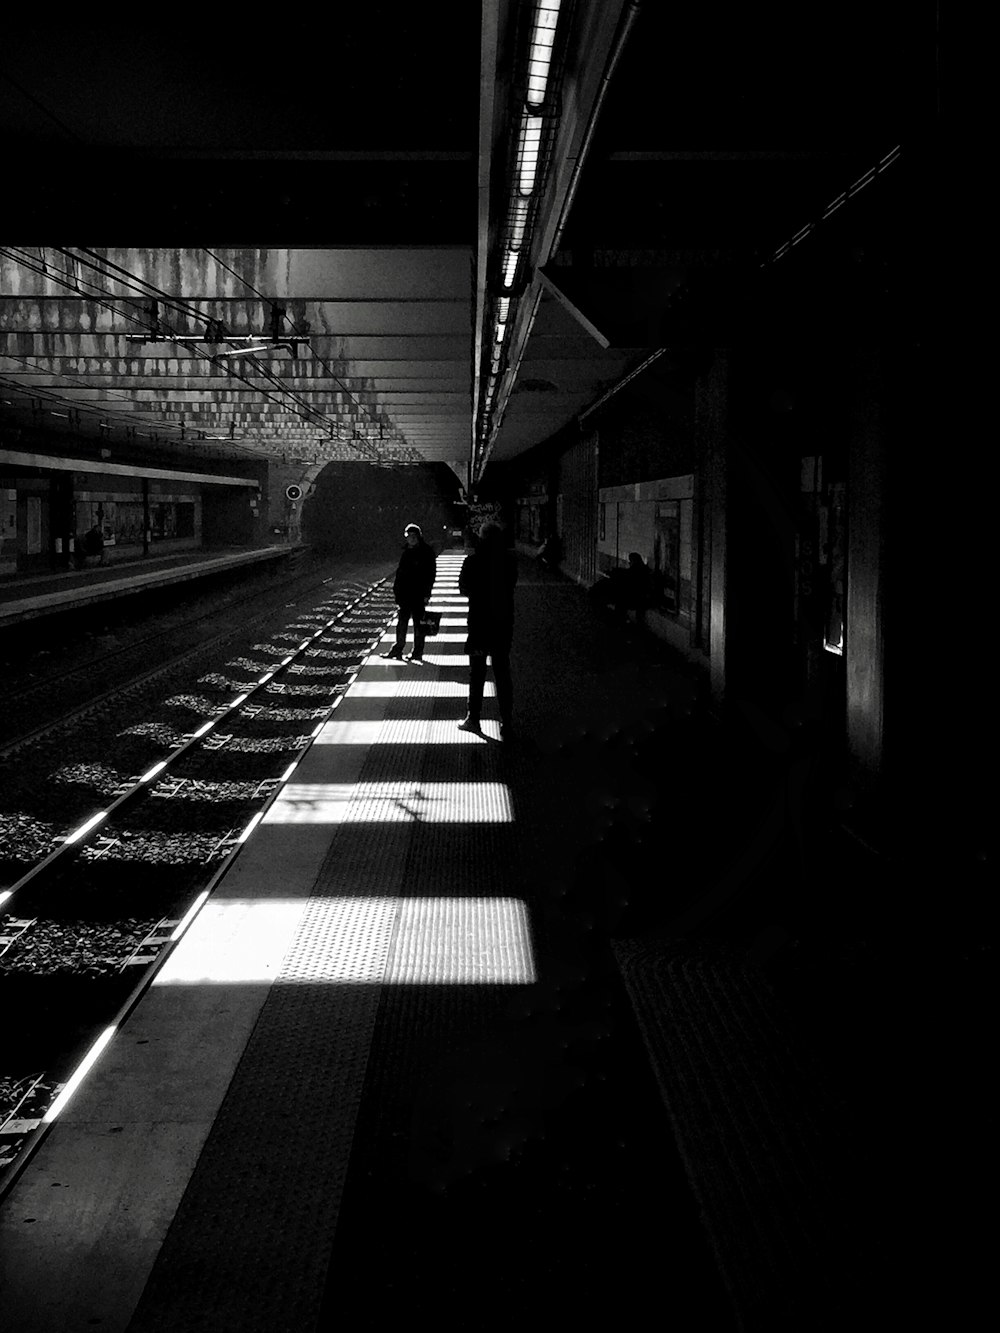 grayscale photo of man walking on train station